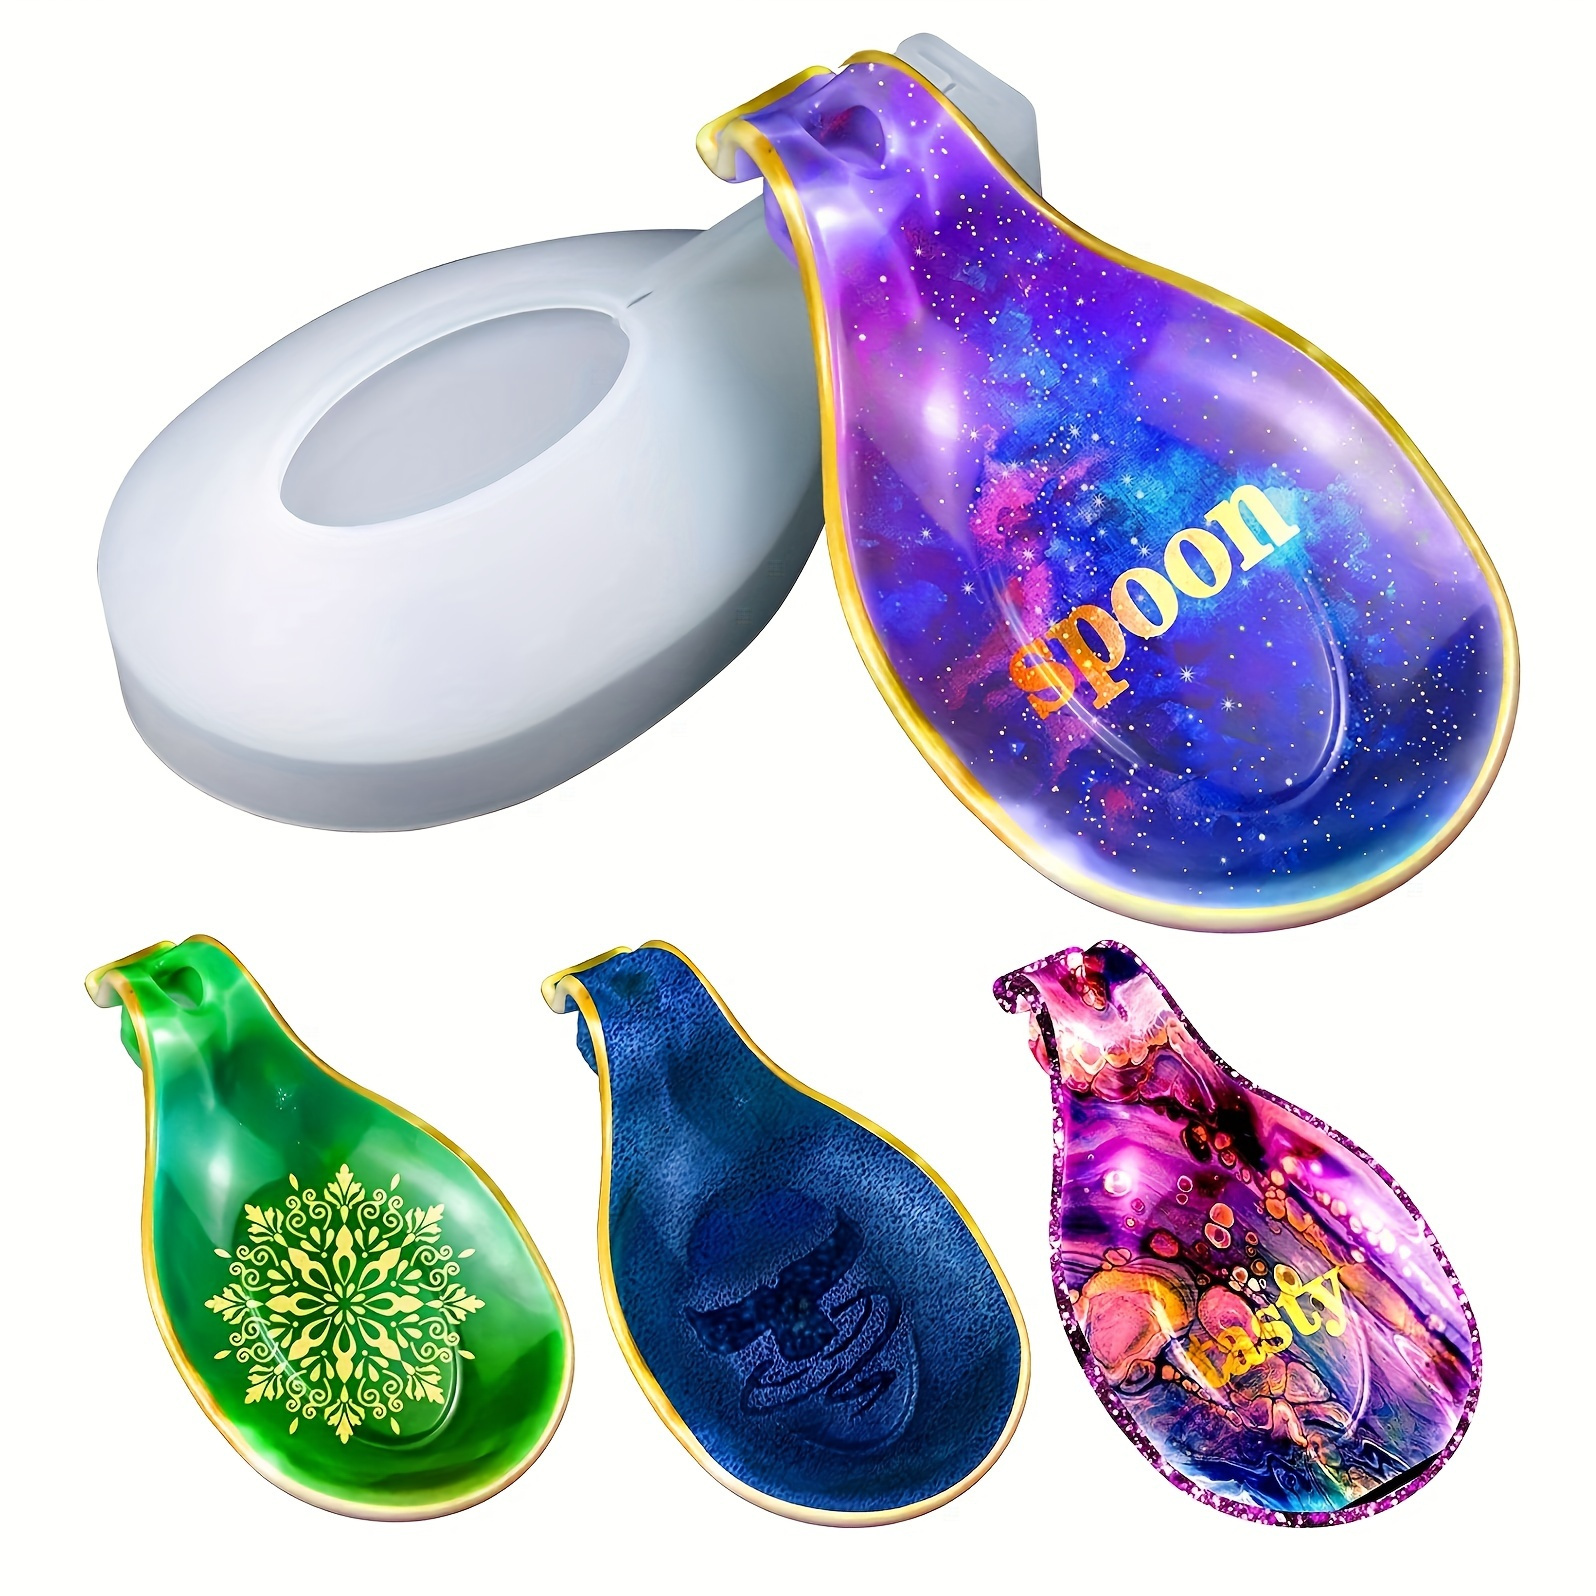 

Spoon Holder Resin Mold, Large Rolling Tray Silicone Mold Epoxy Casting Flexible Almond-shaped For Stove Top Rest Home Decoration Kitchen Utensil Jewelry Holder Diy Craft Fruit Candy Tray